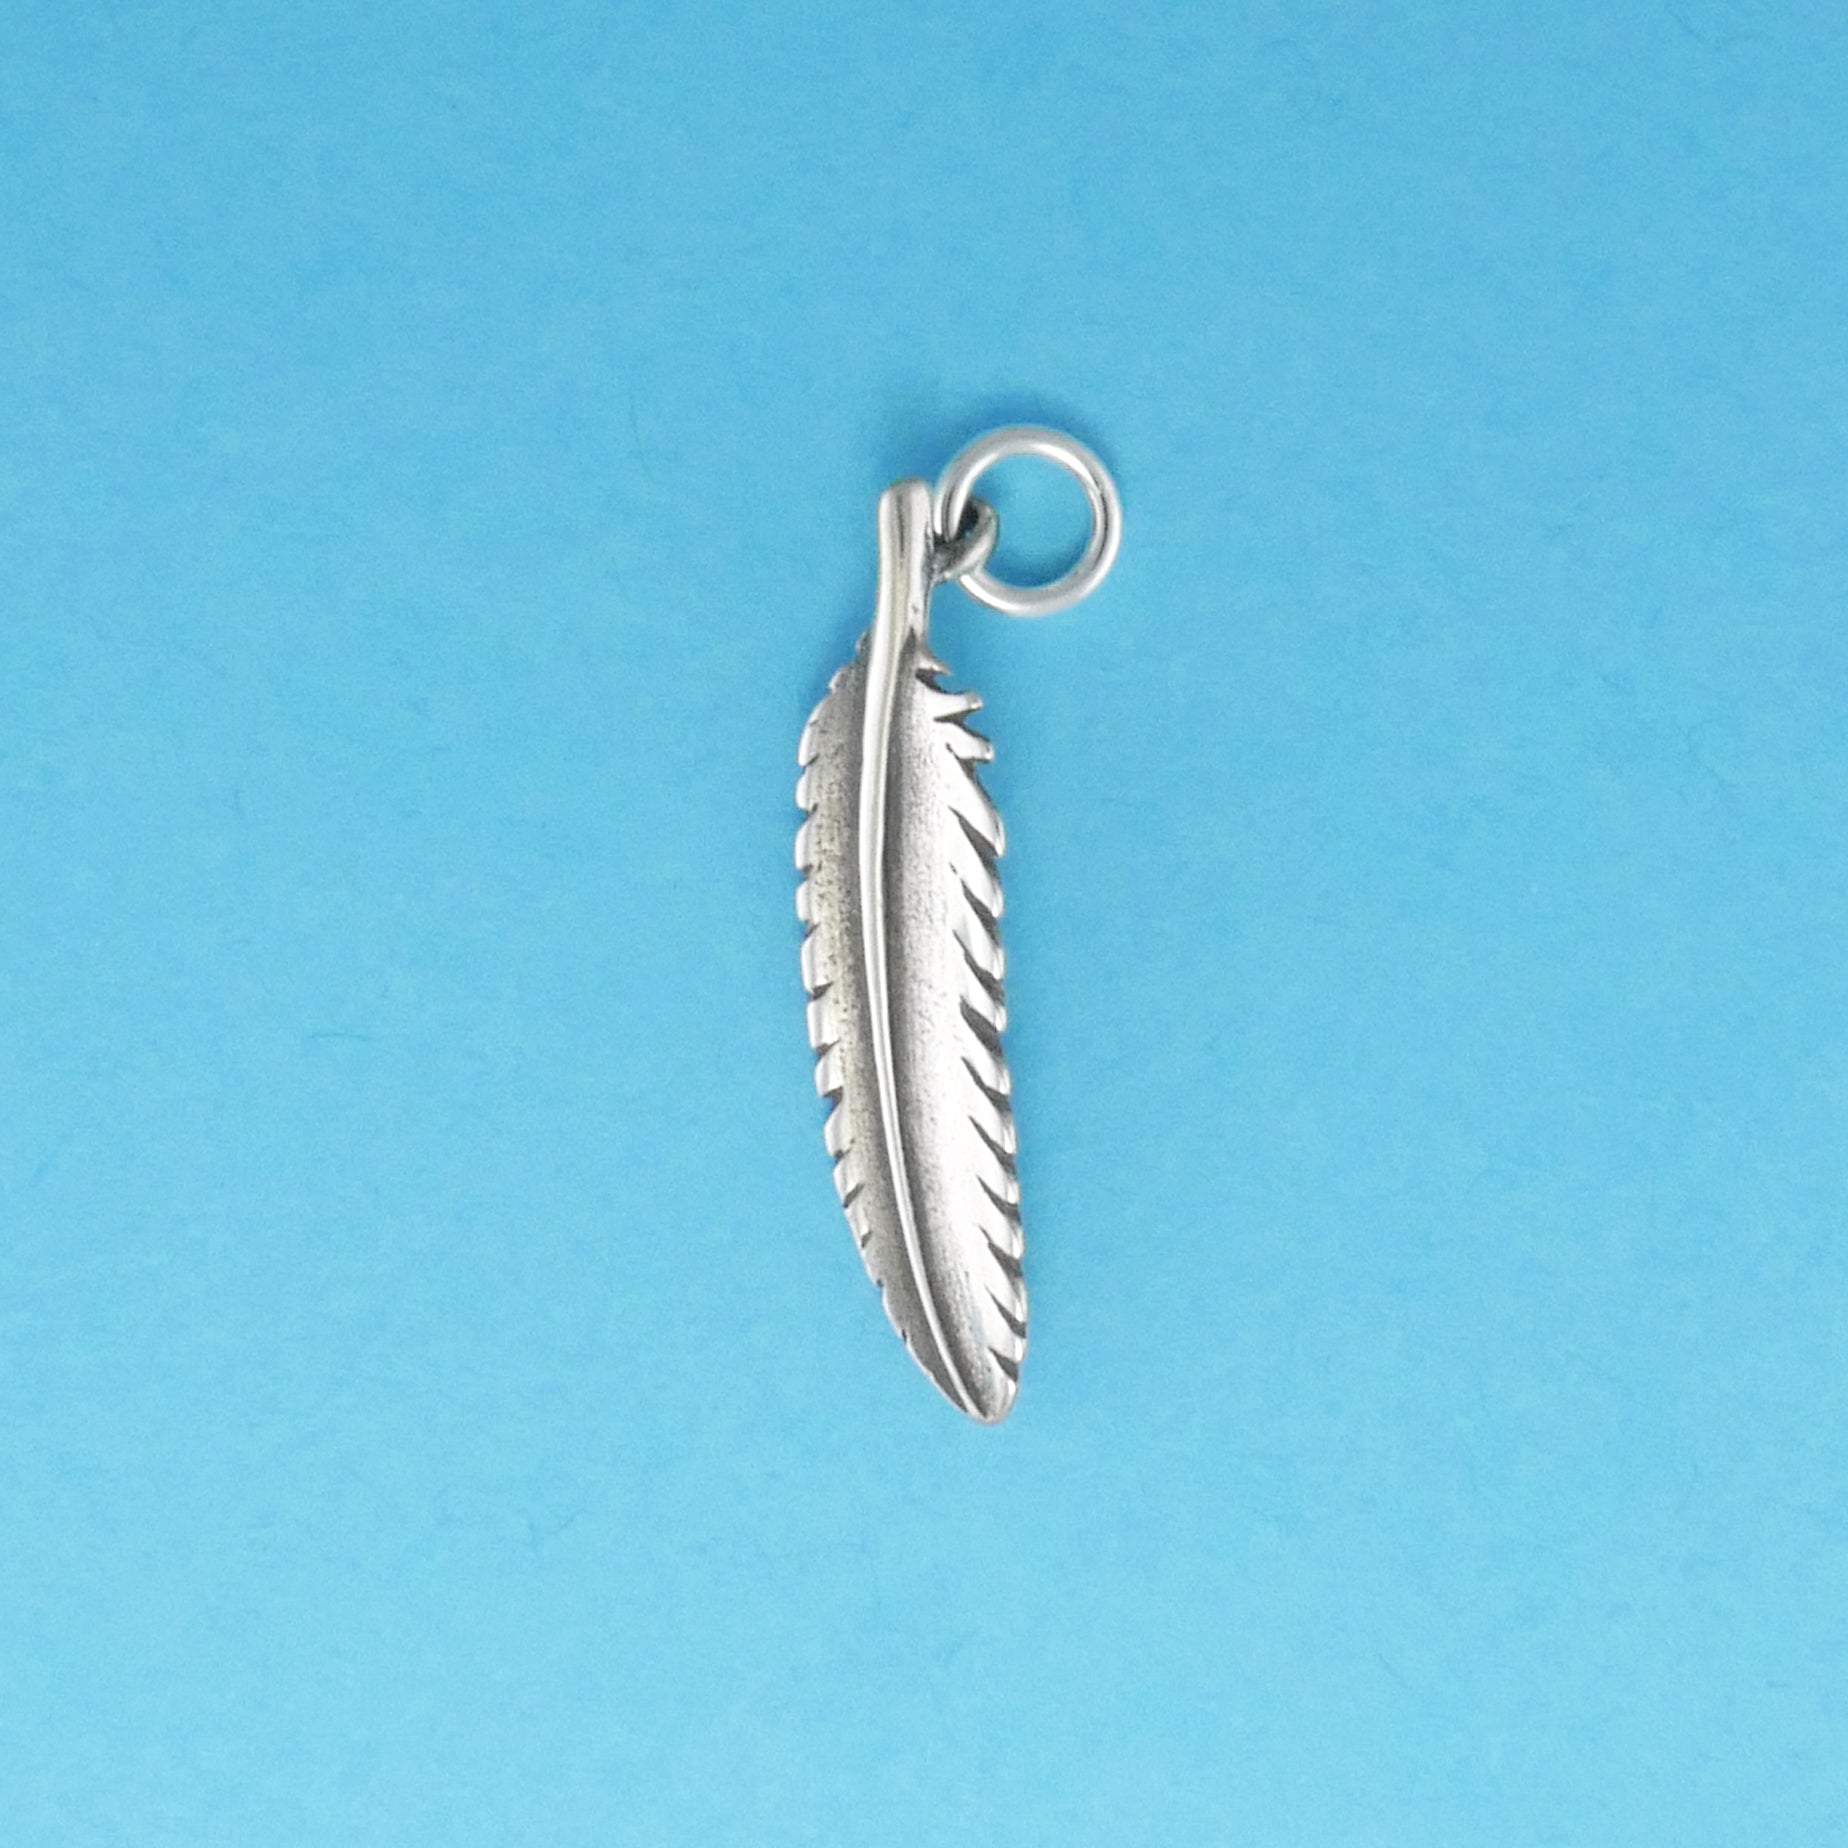 Feather Charm - Charmworks